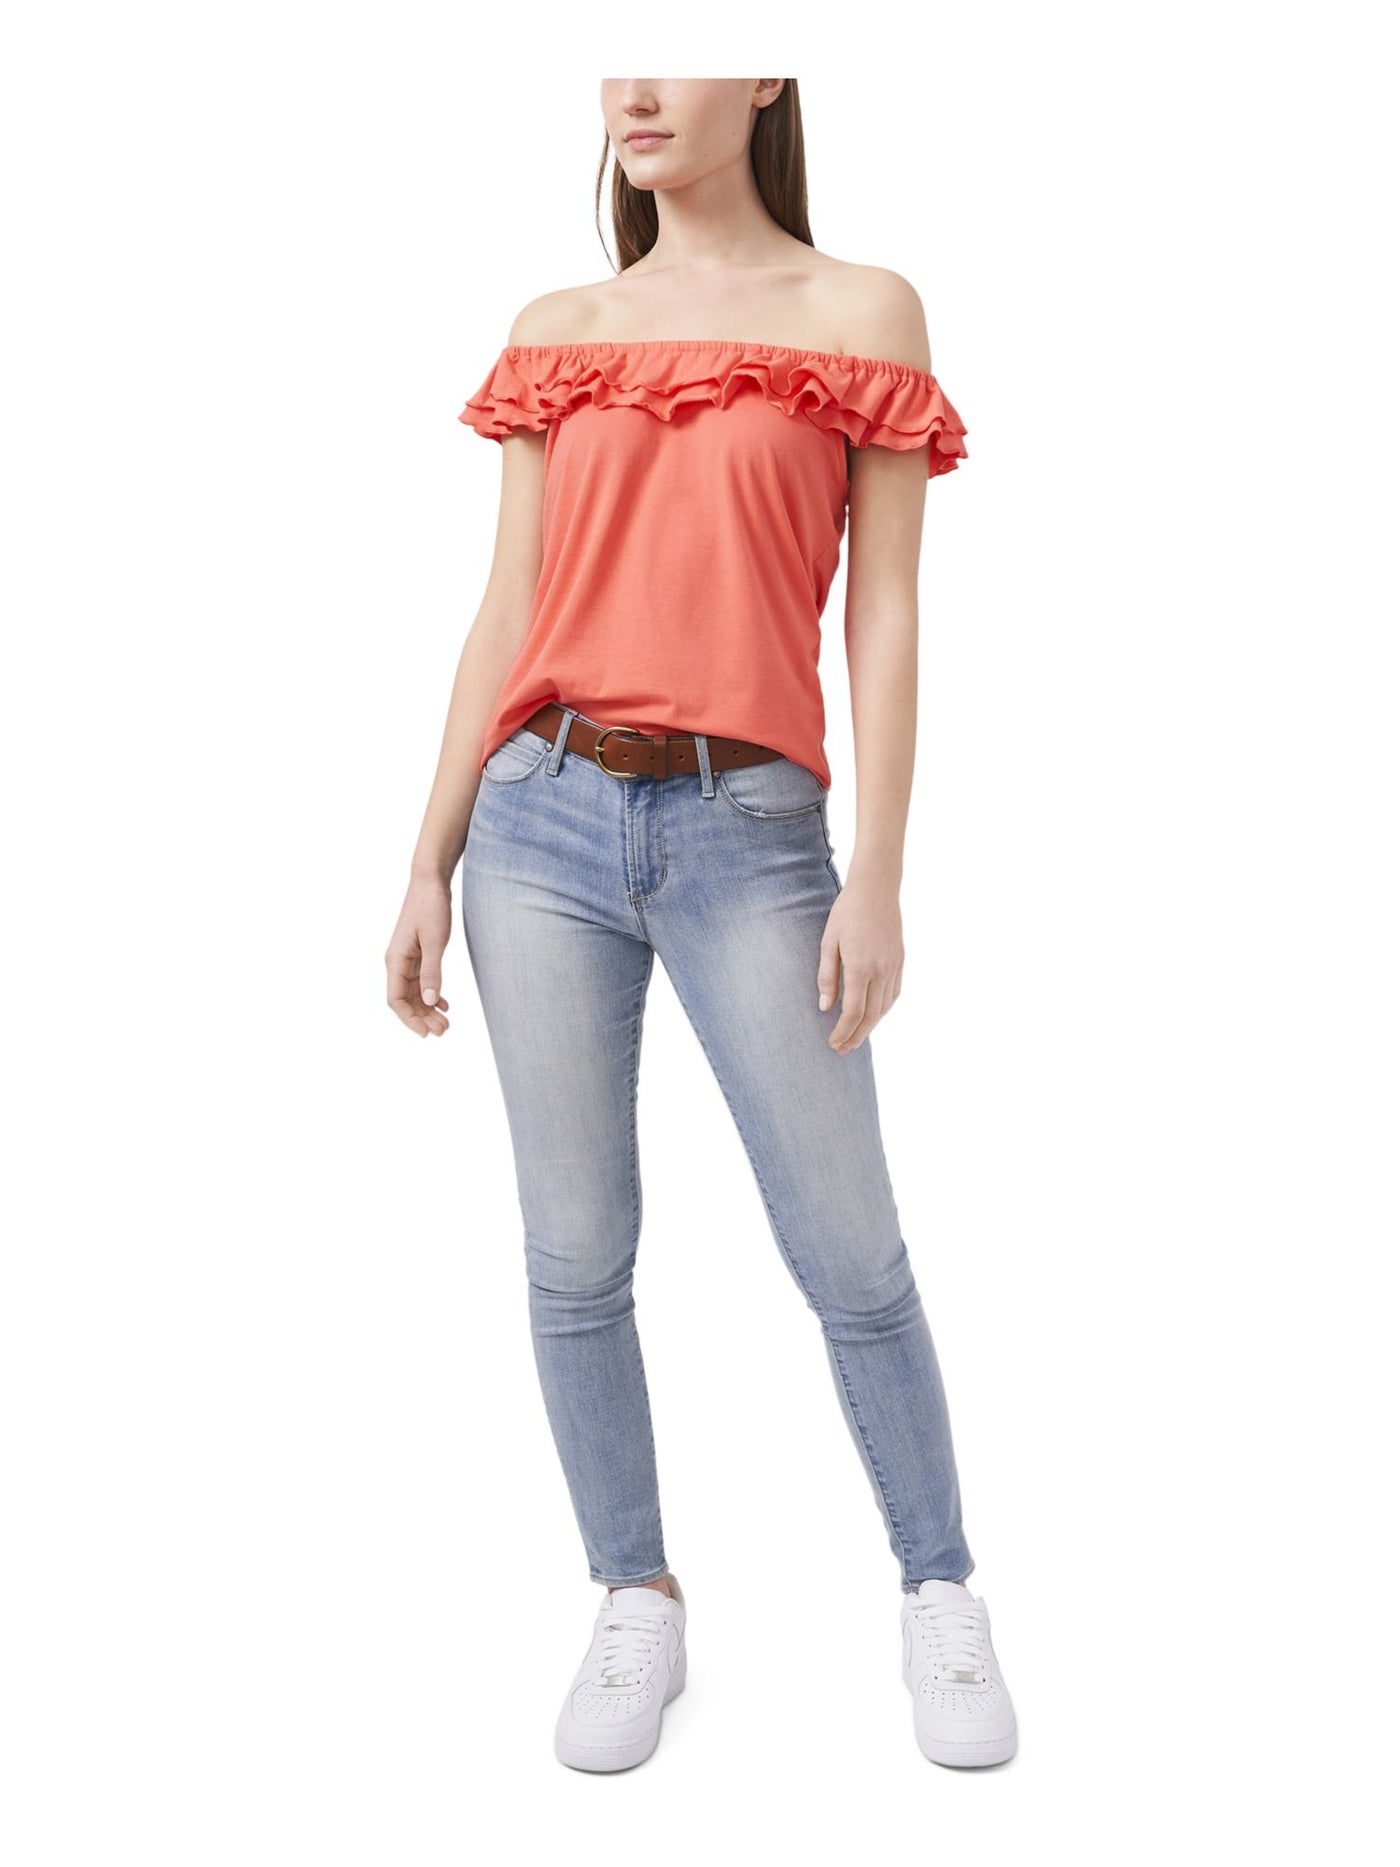 RILEY&RAE Womens Coral Stretch Ruffled Flutter Sleeve Off Shoulder Top XS